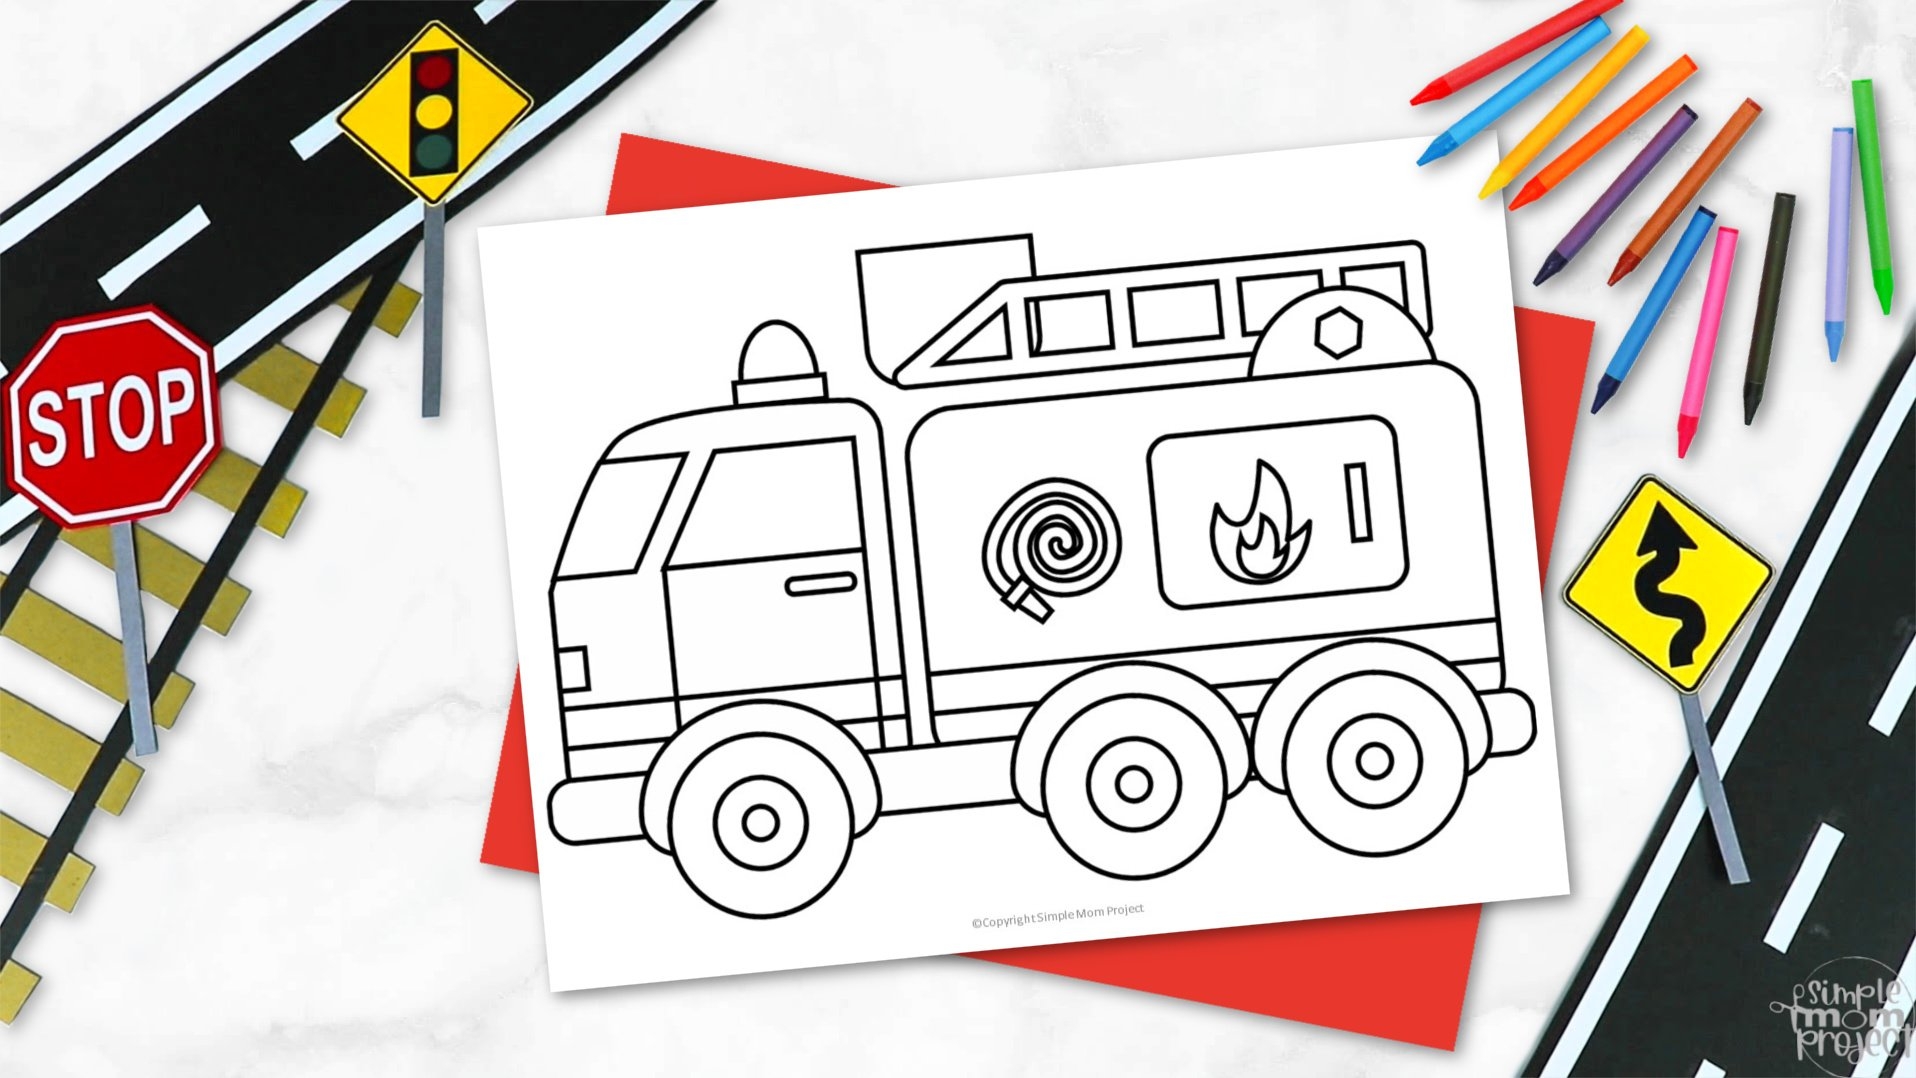 Free Printable Fire Truck Template Simple Mom Project